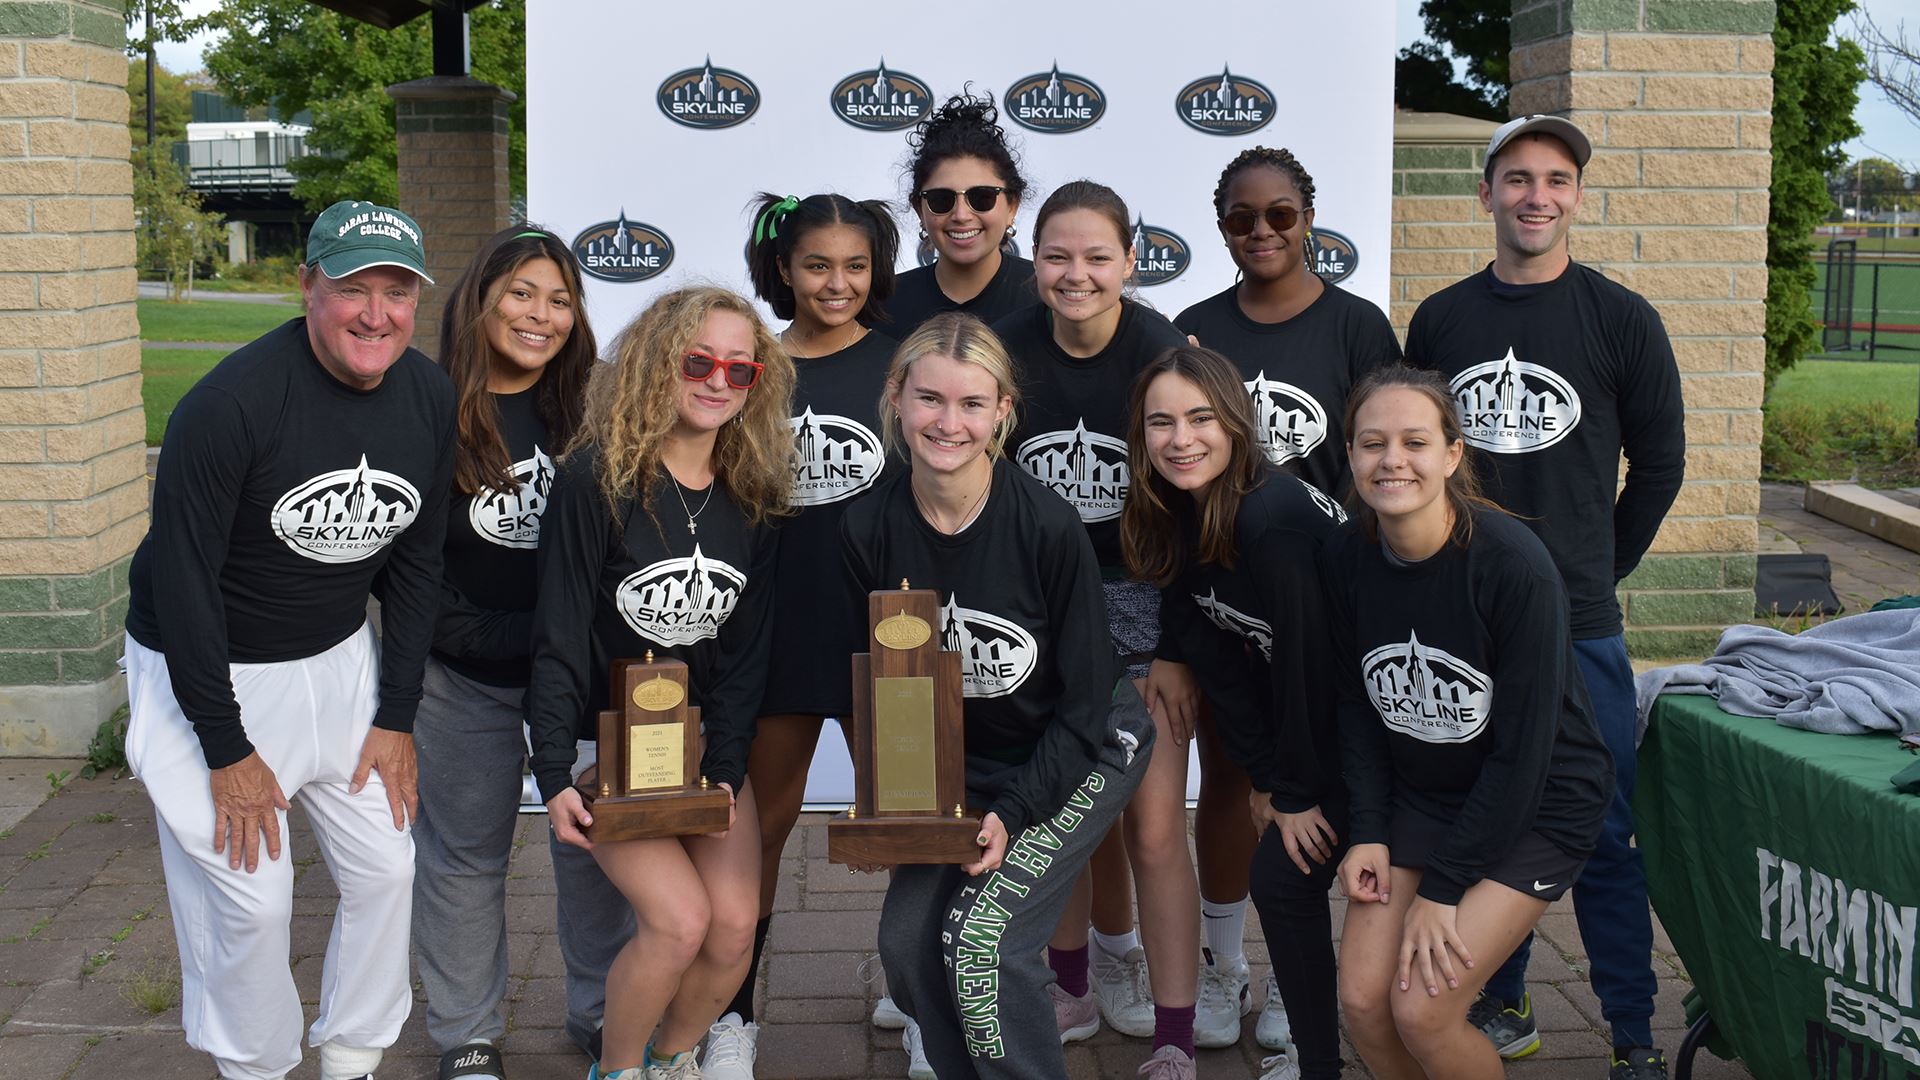 Group photo of the women's tennis team